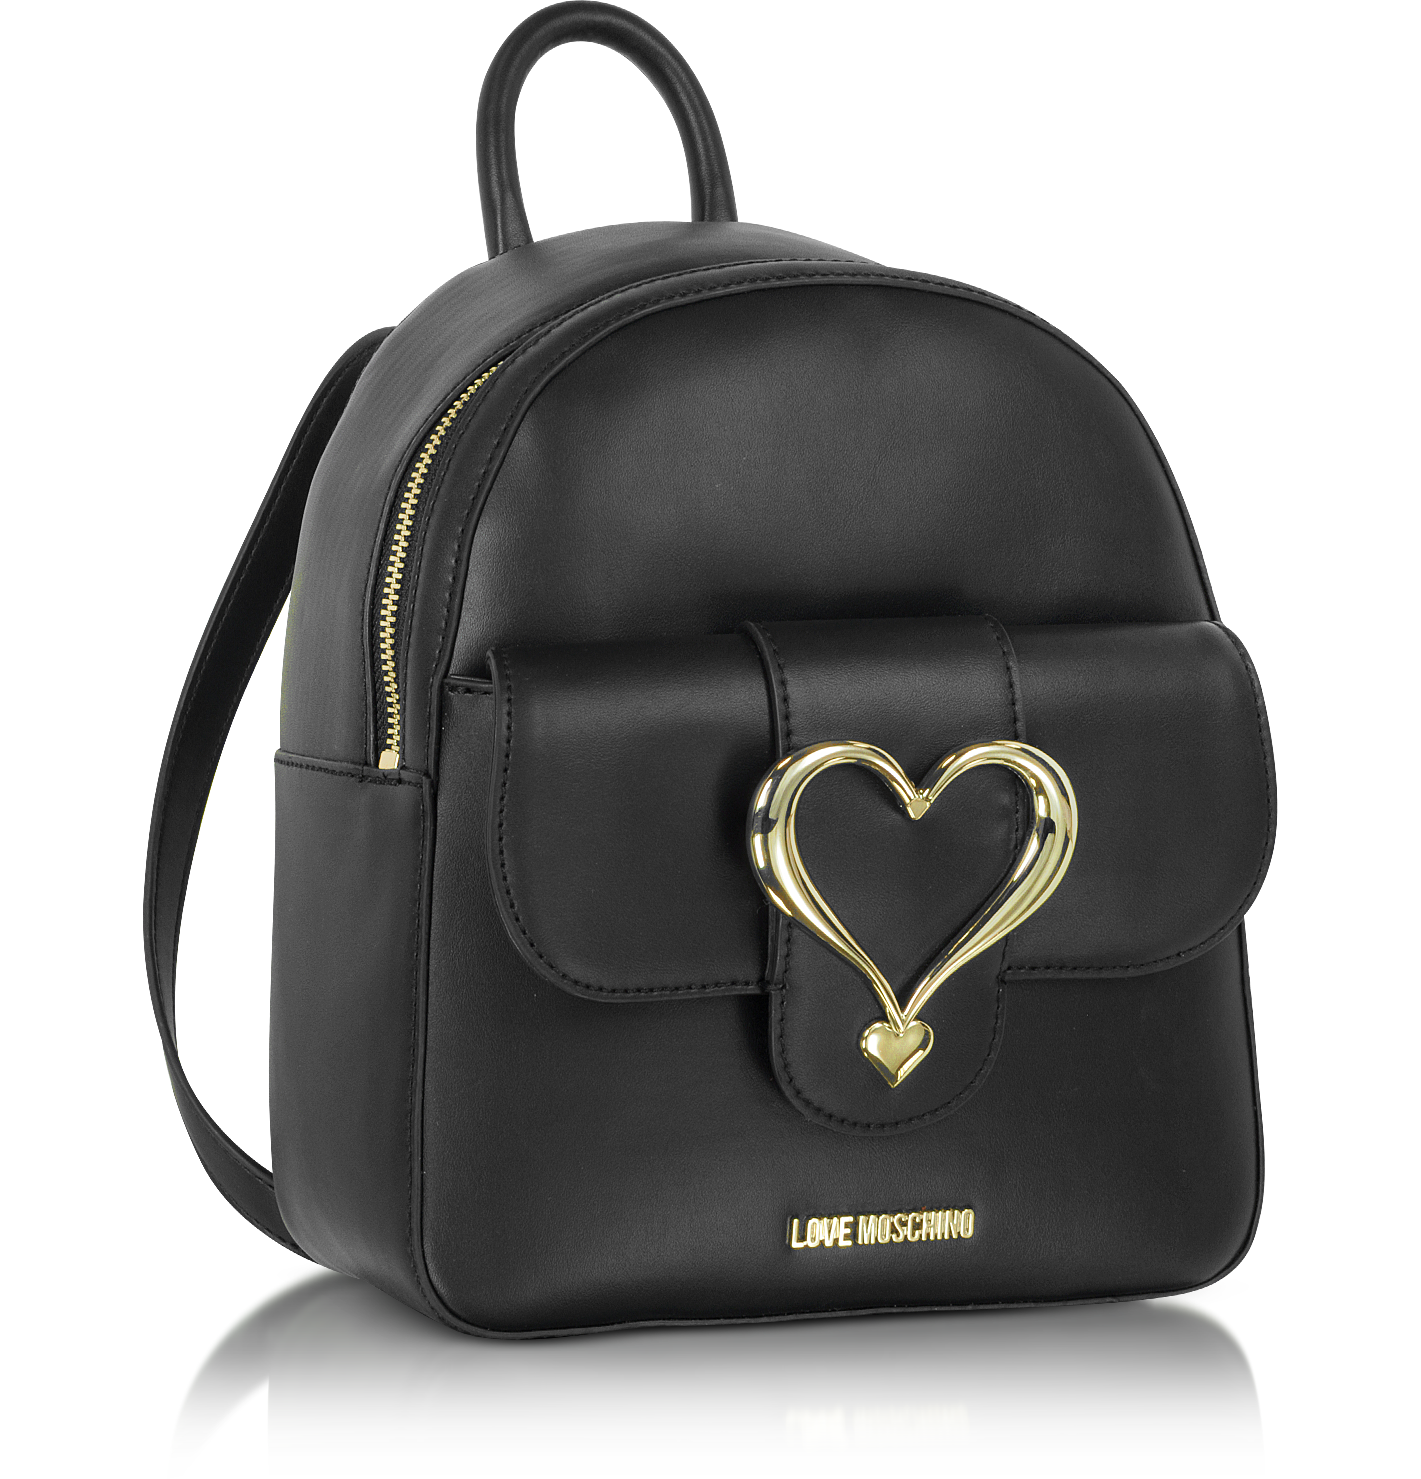 Love Moschino Black Eco Leather Backpack w/Heart Buckle at FORZIERI UK